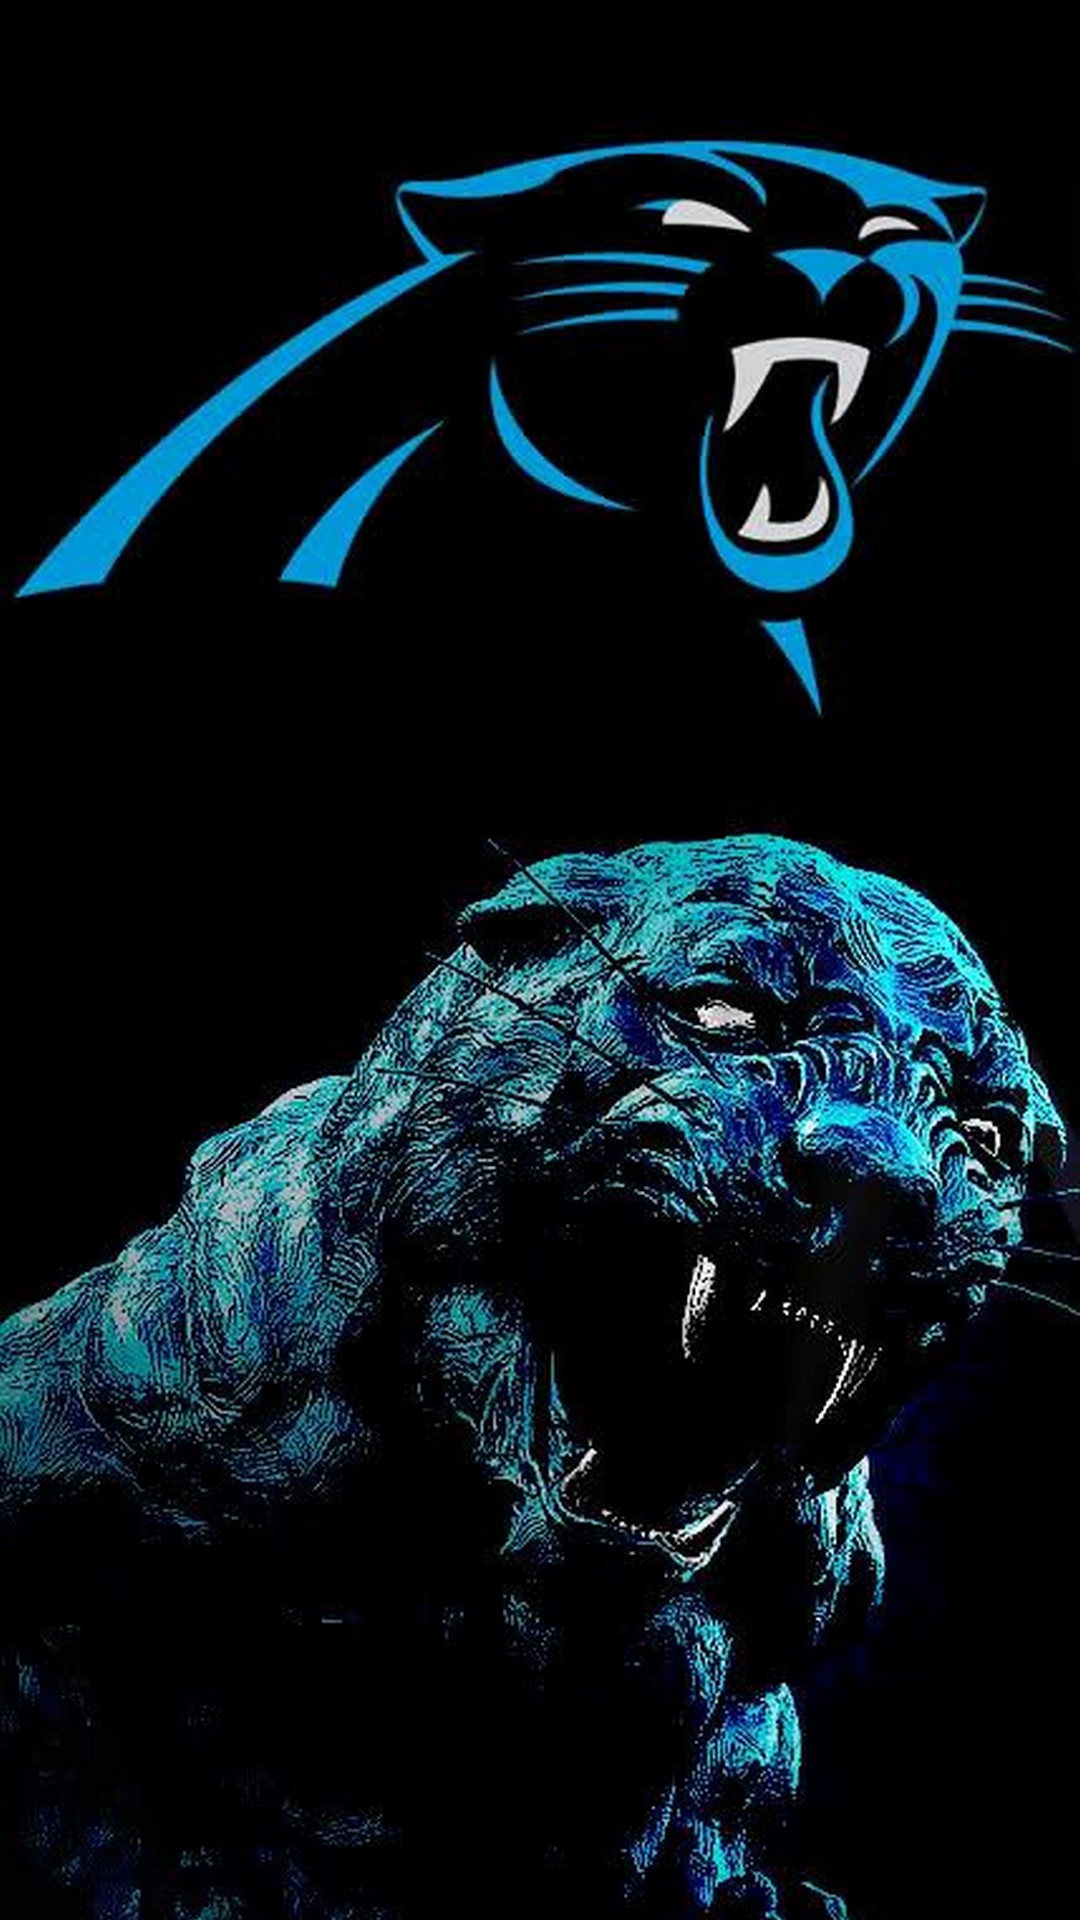 Screensaver iPhone Carolina Panthers with high-resolution 1080x1920 pixel. Donwload and set as wallpaper for your iPhone X, iPhone XS home screen backgrounds, XS Max, XR, iPhone8 lock screen wallpaper, iPhone 7, 6, SE and other mobile devices